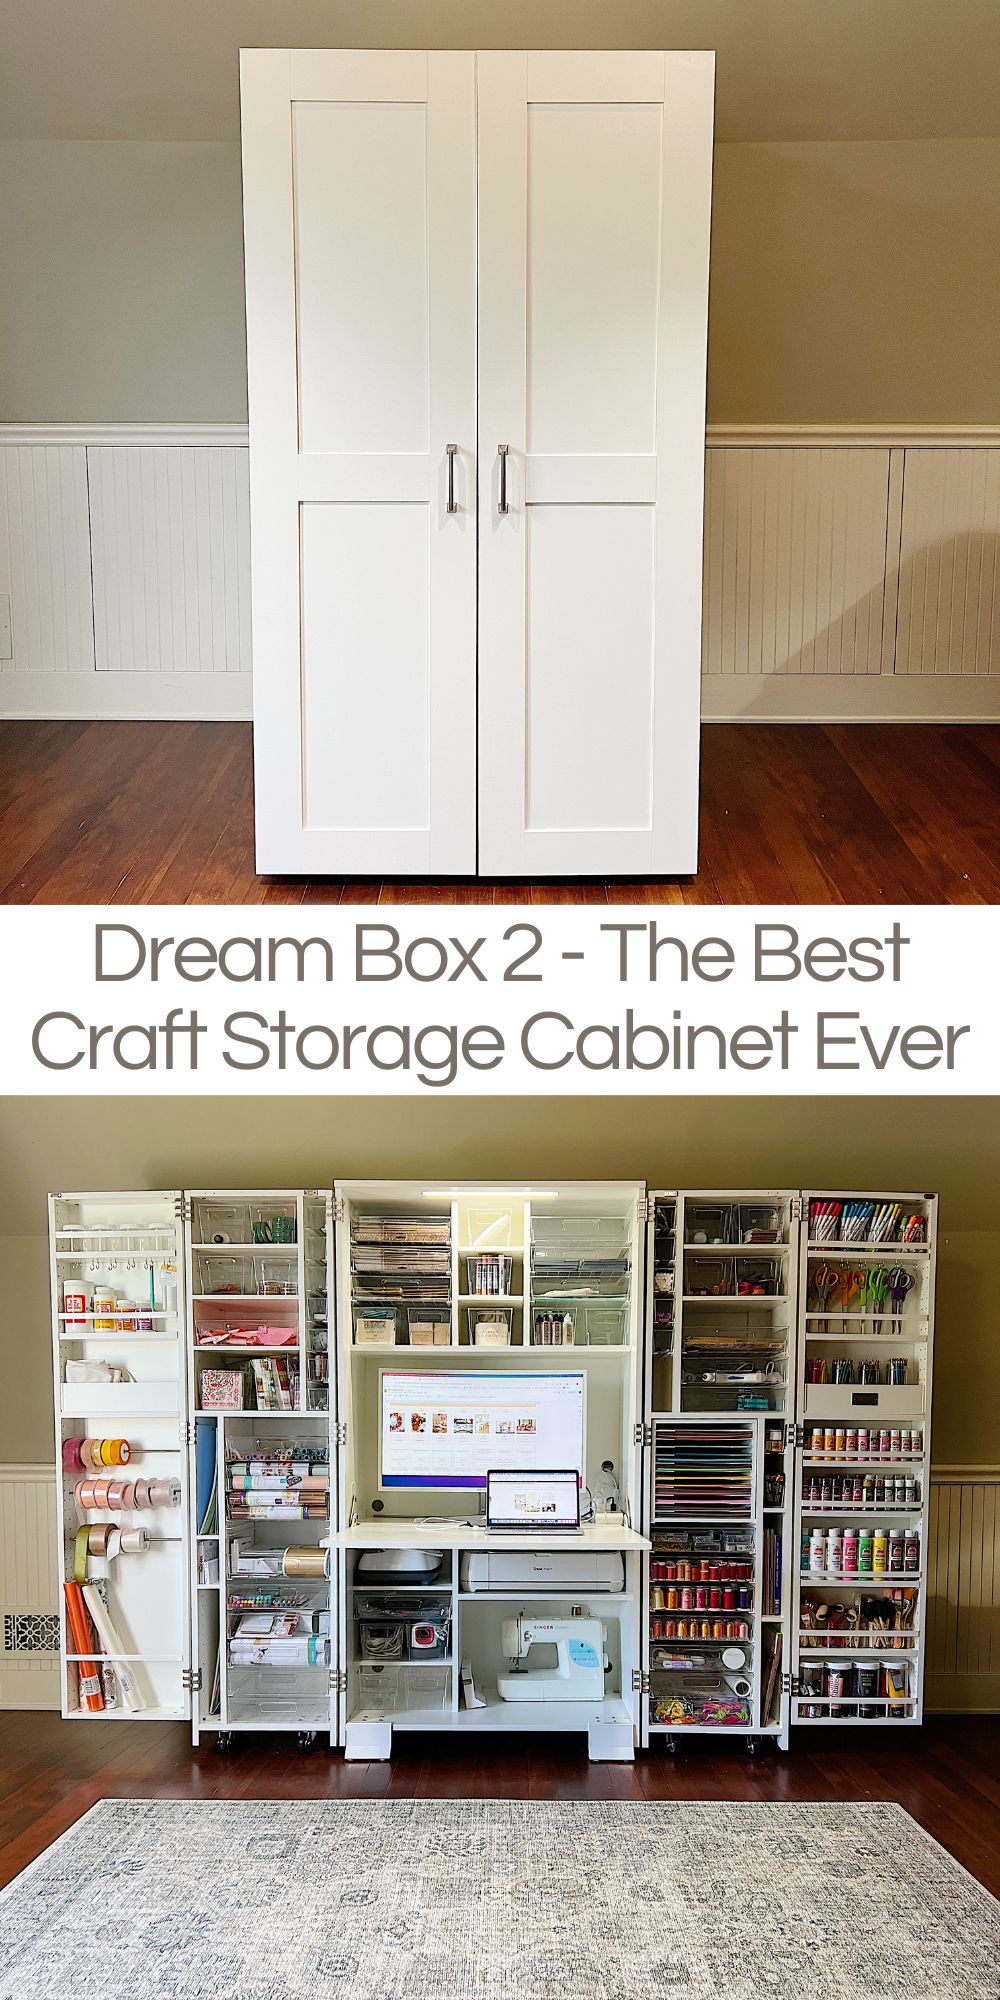 If you're a craft lover, you know the struggle of craft supplies storage. This has been an issue of mine for years ... but now I have a new Dreambox 2.